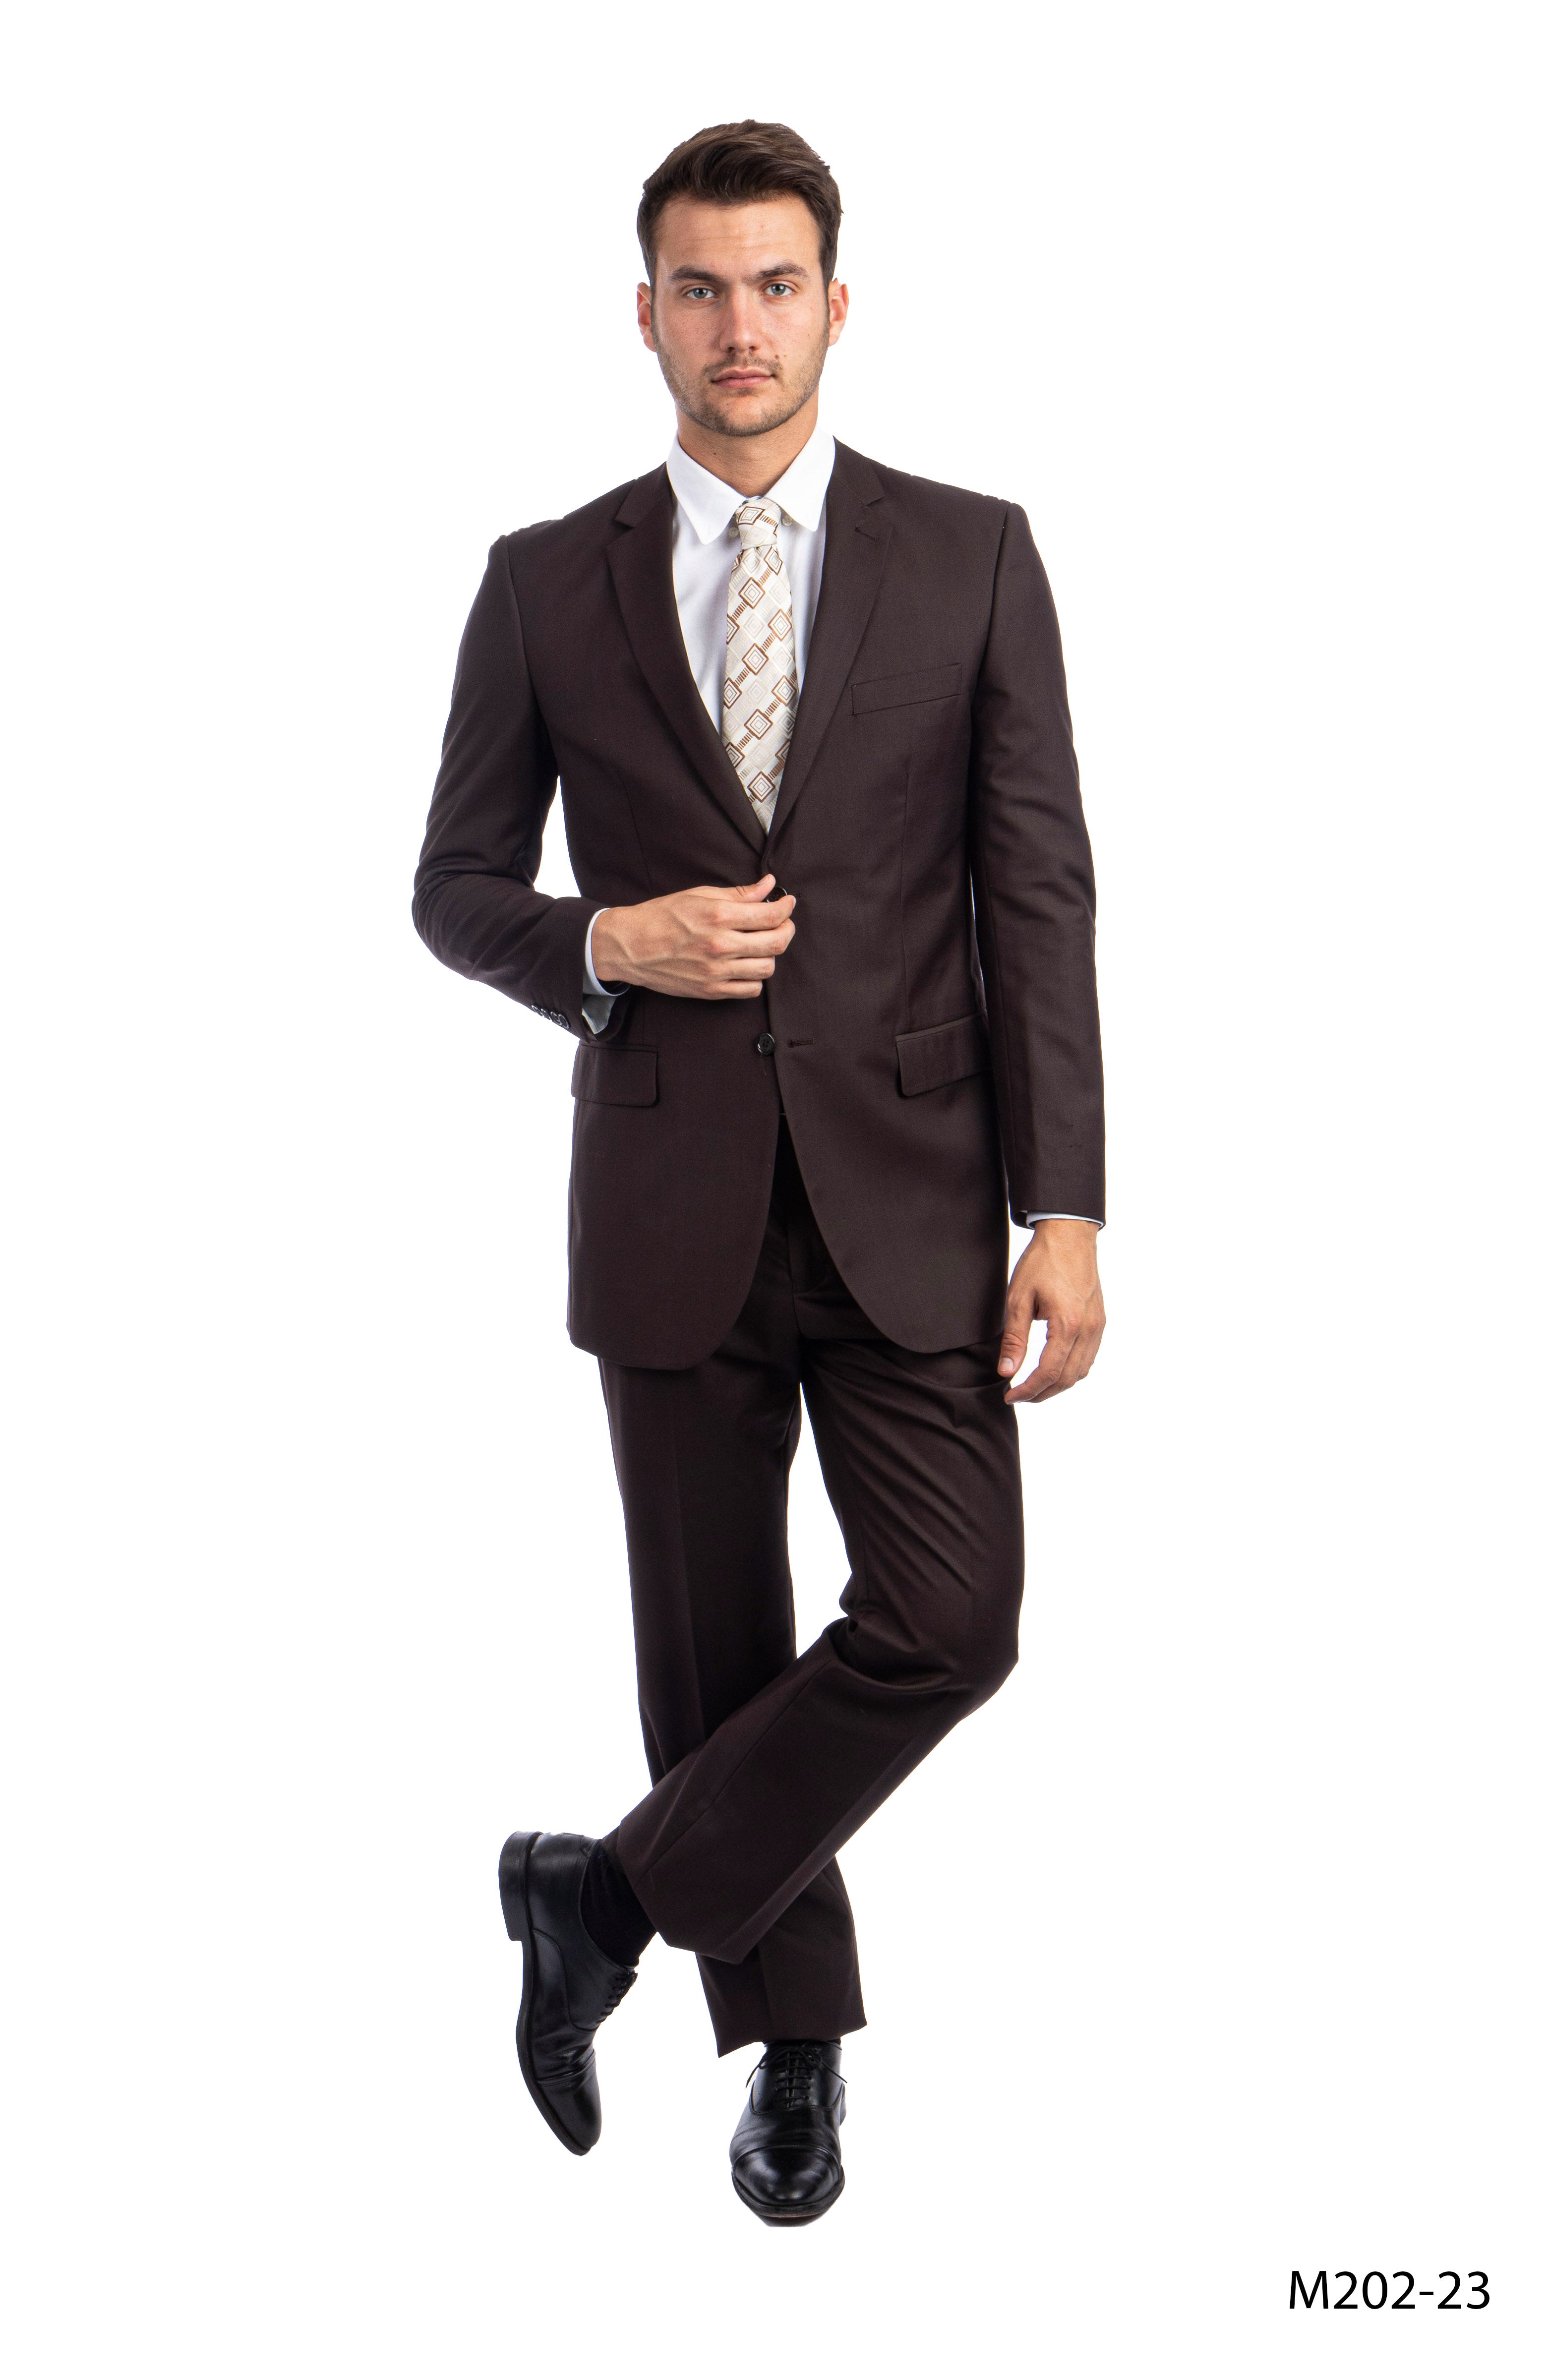 Chocolate Suit For Men Formal Suits For All Ocassions